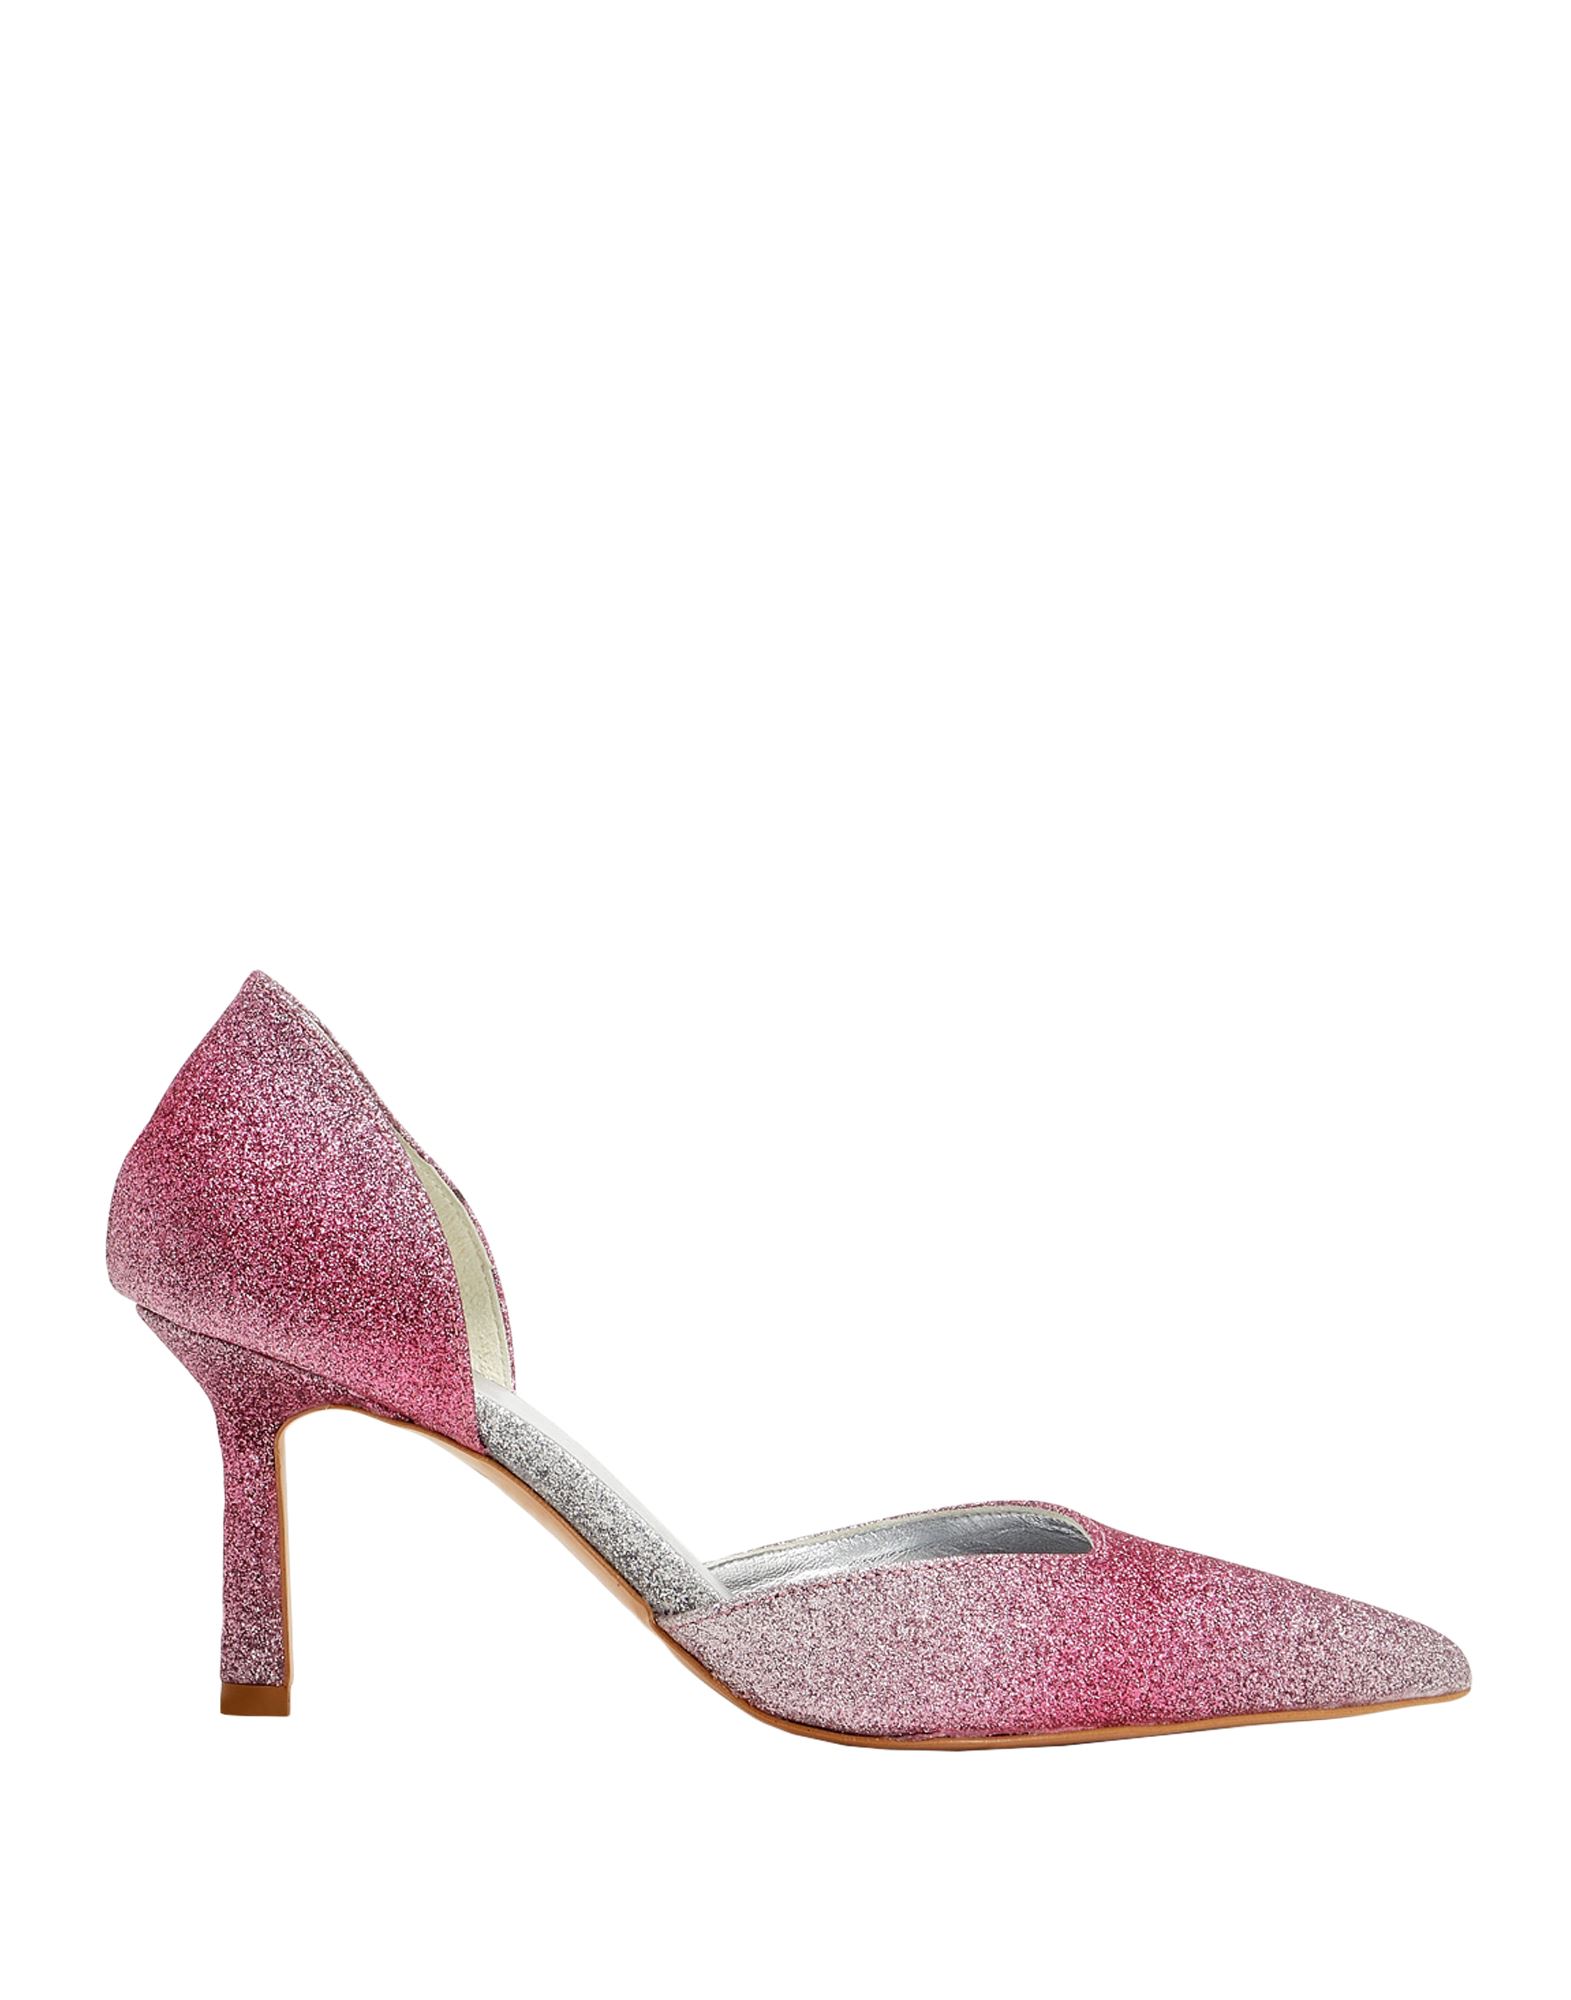 8 By Yoox Pumps In Pink